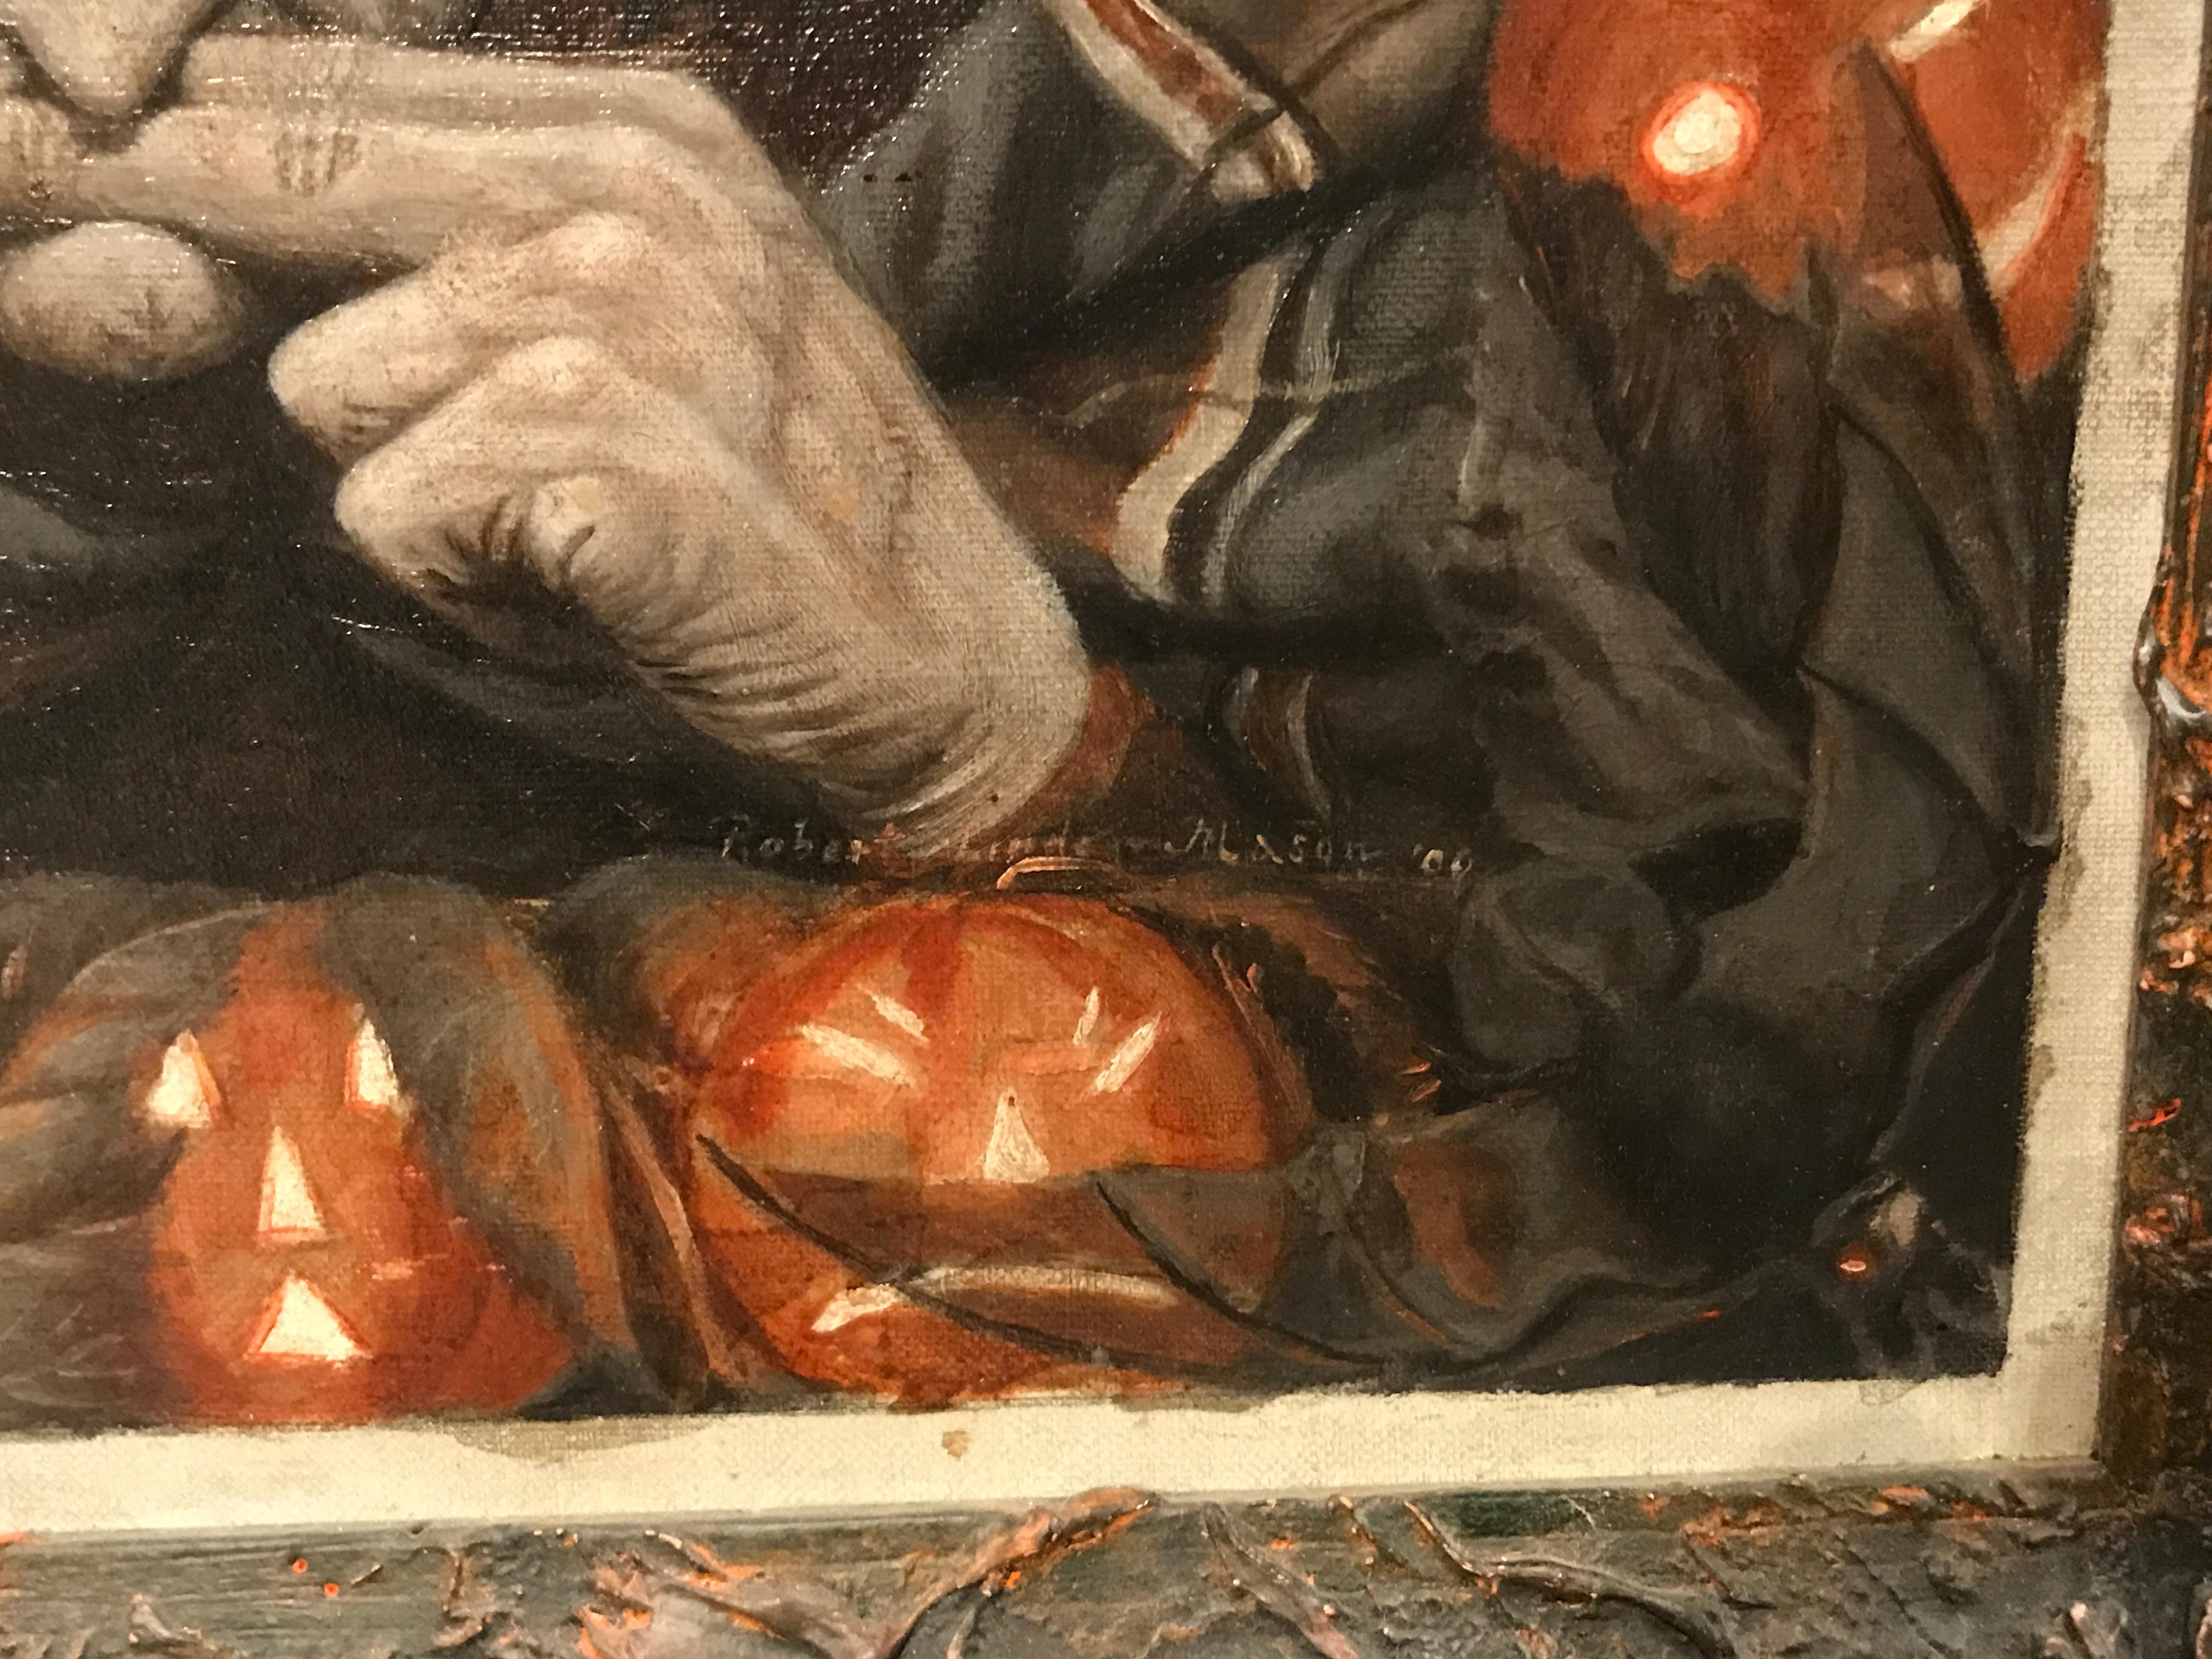 Halloween Witch with Pumpkins - Realist Painting by Robert Lindsay Mason